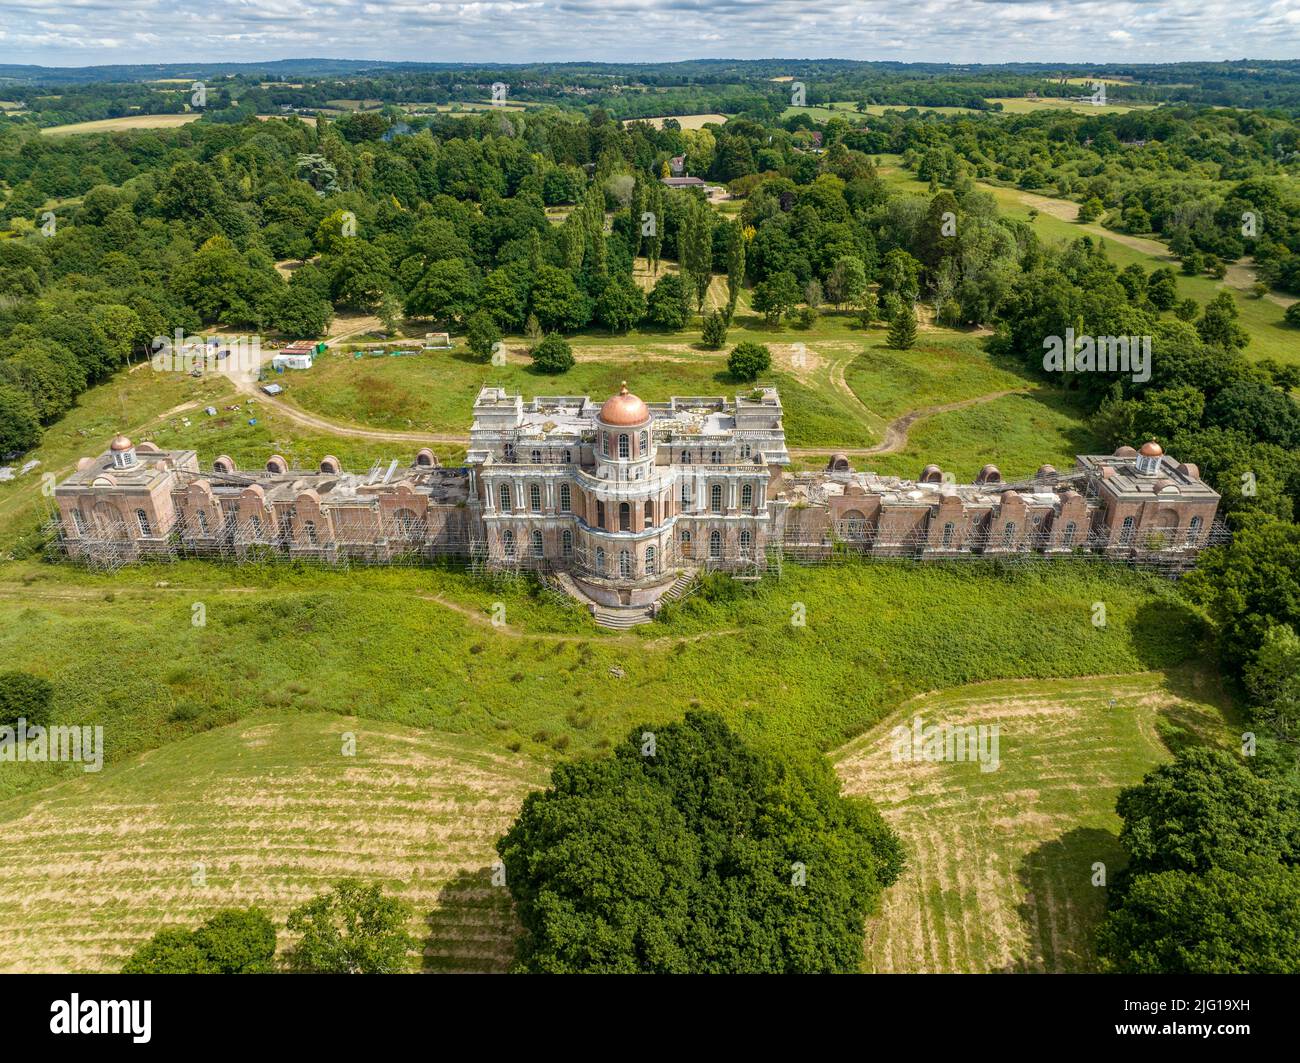 Hamilton Palace near Uckfield, East Sussex, the property belonging to landlord and property baron Nicholas Van Hoogstraten.  abandoned Sussex mansion. Stock Photo